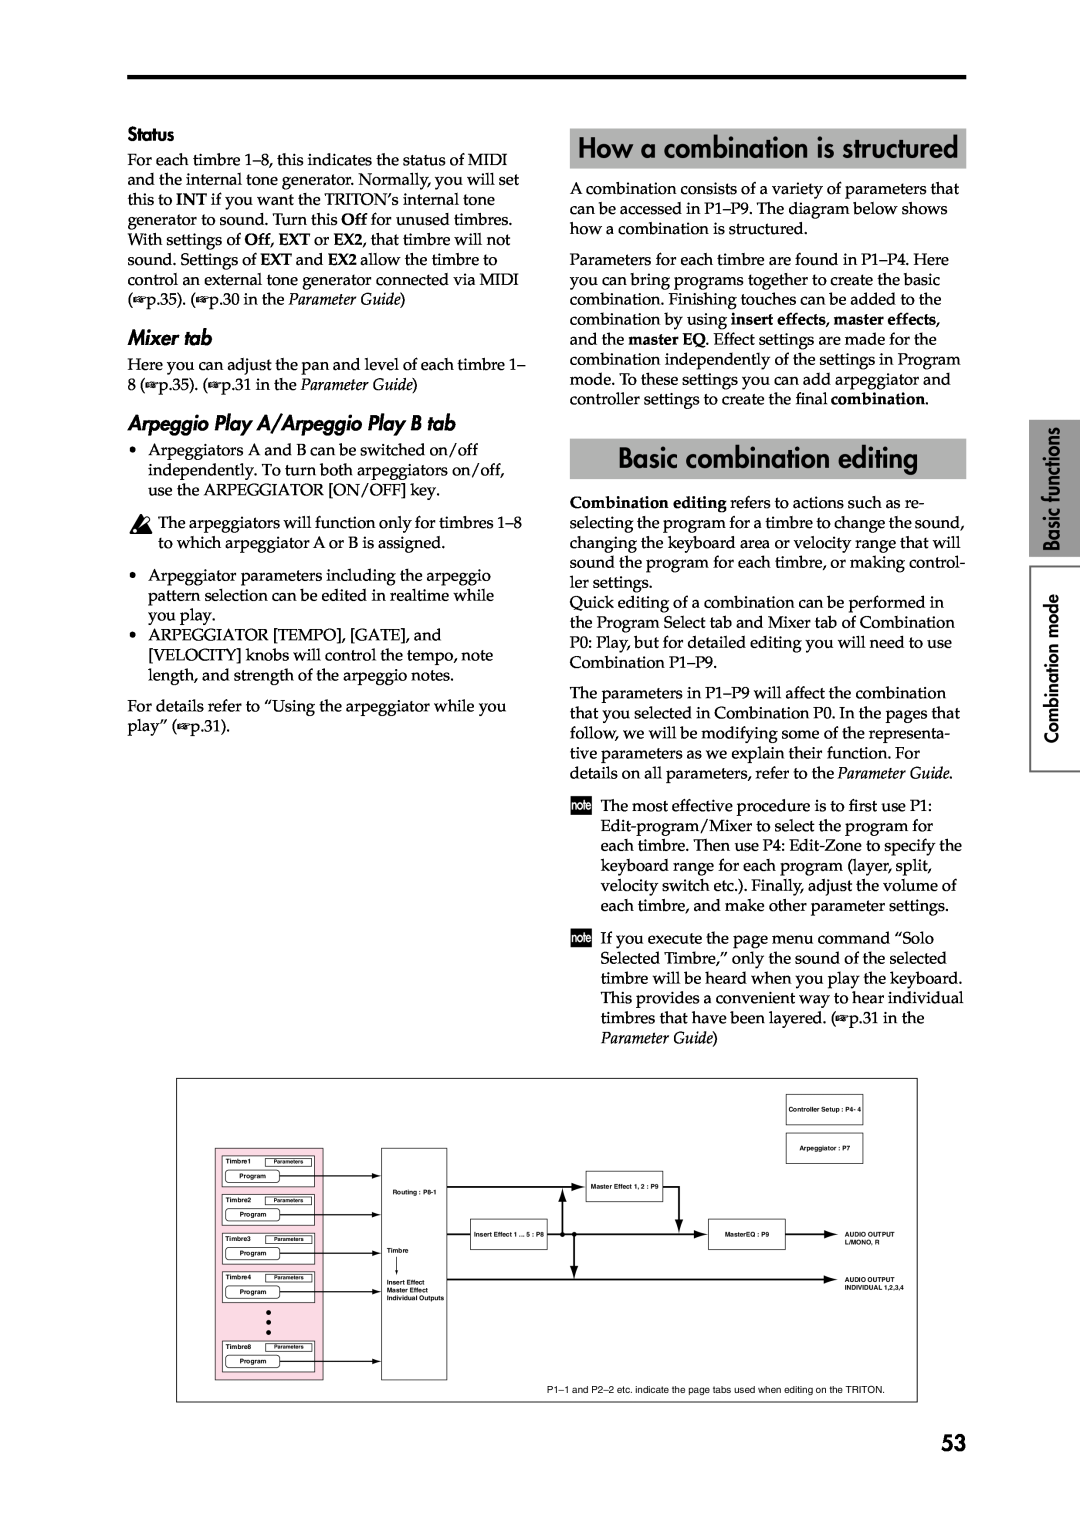 Korg Speaker System owner manual How a combination is structured, Basic combination editing, Mixer tab, Status 